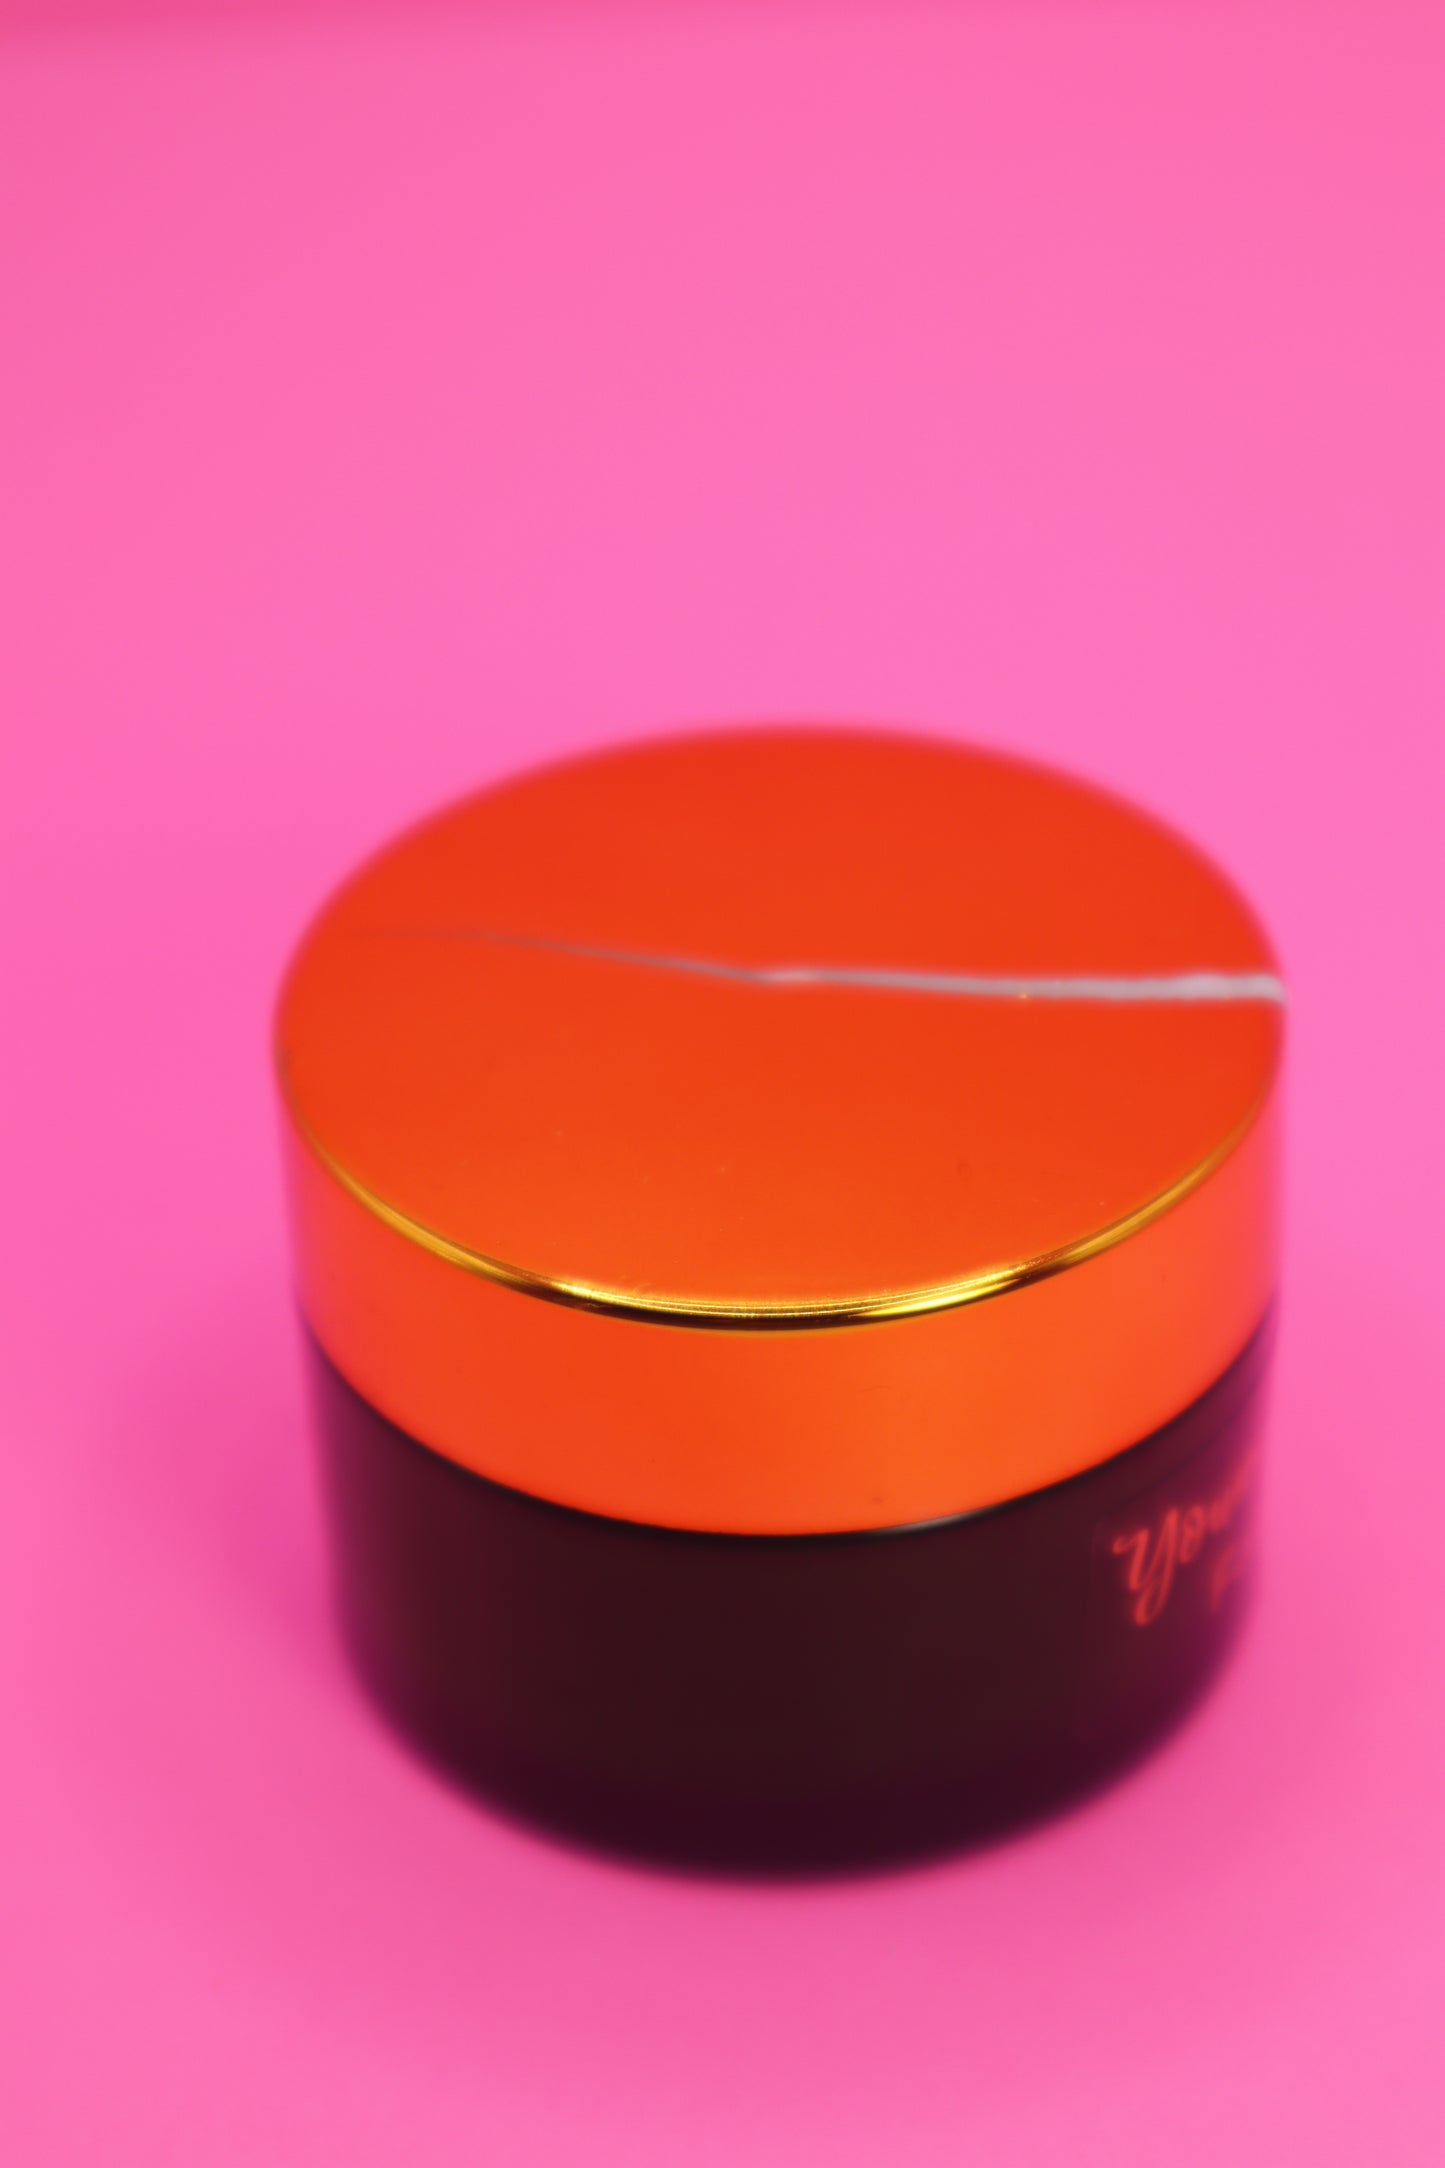 Young & Flawless Cleansing Face Balm